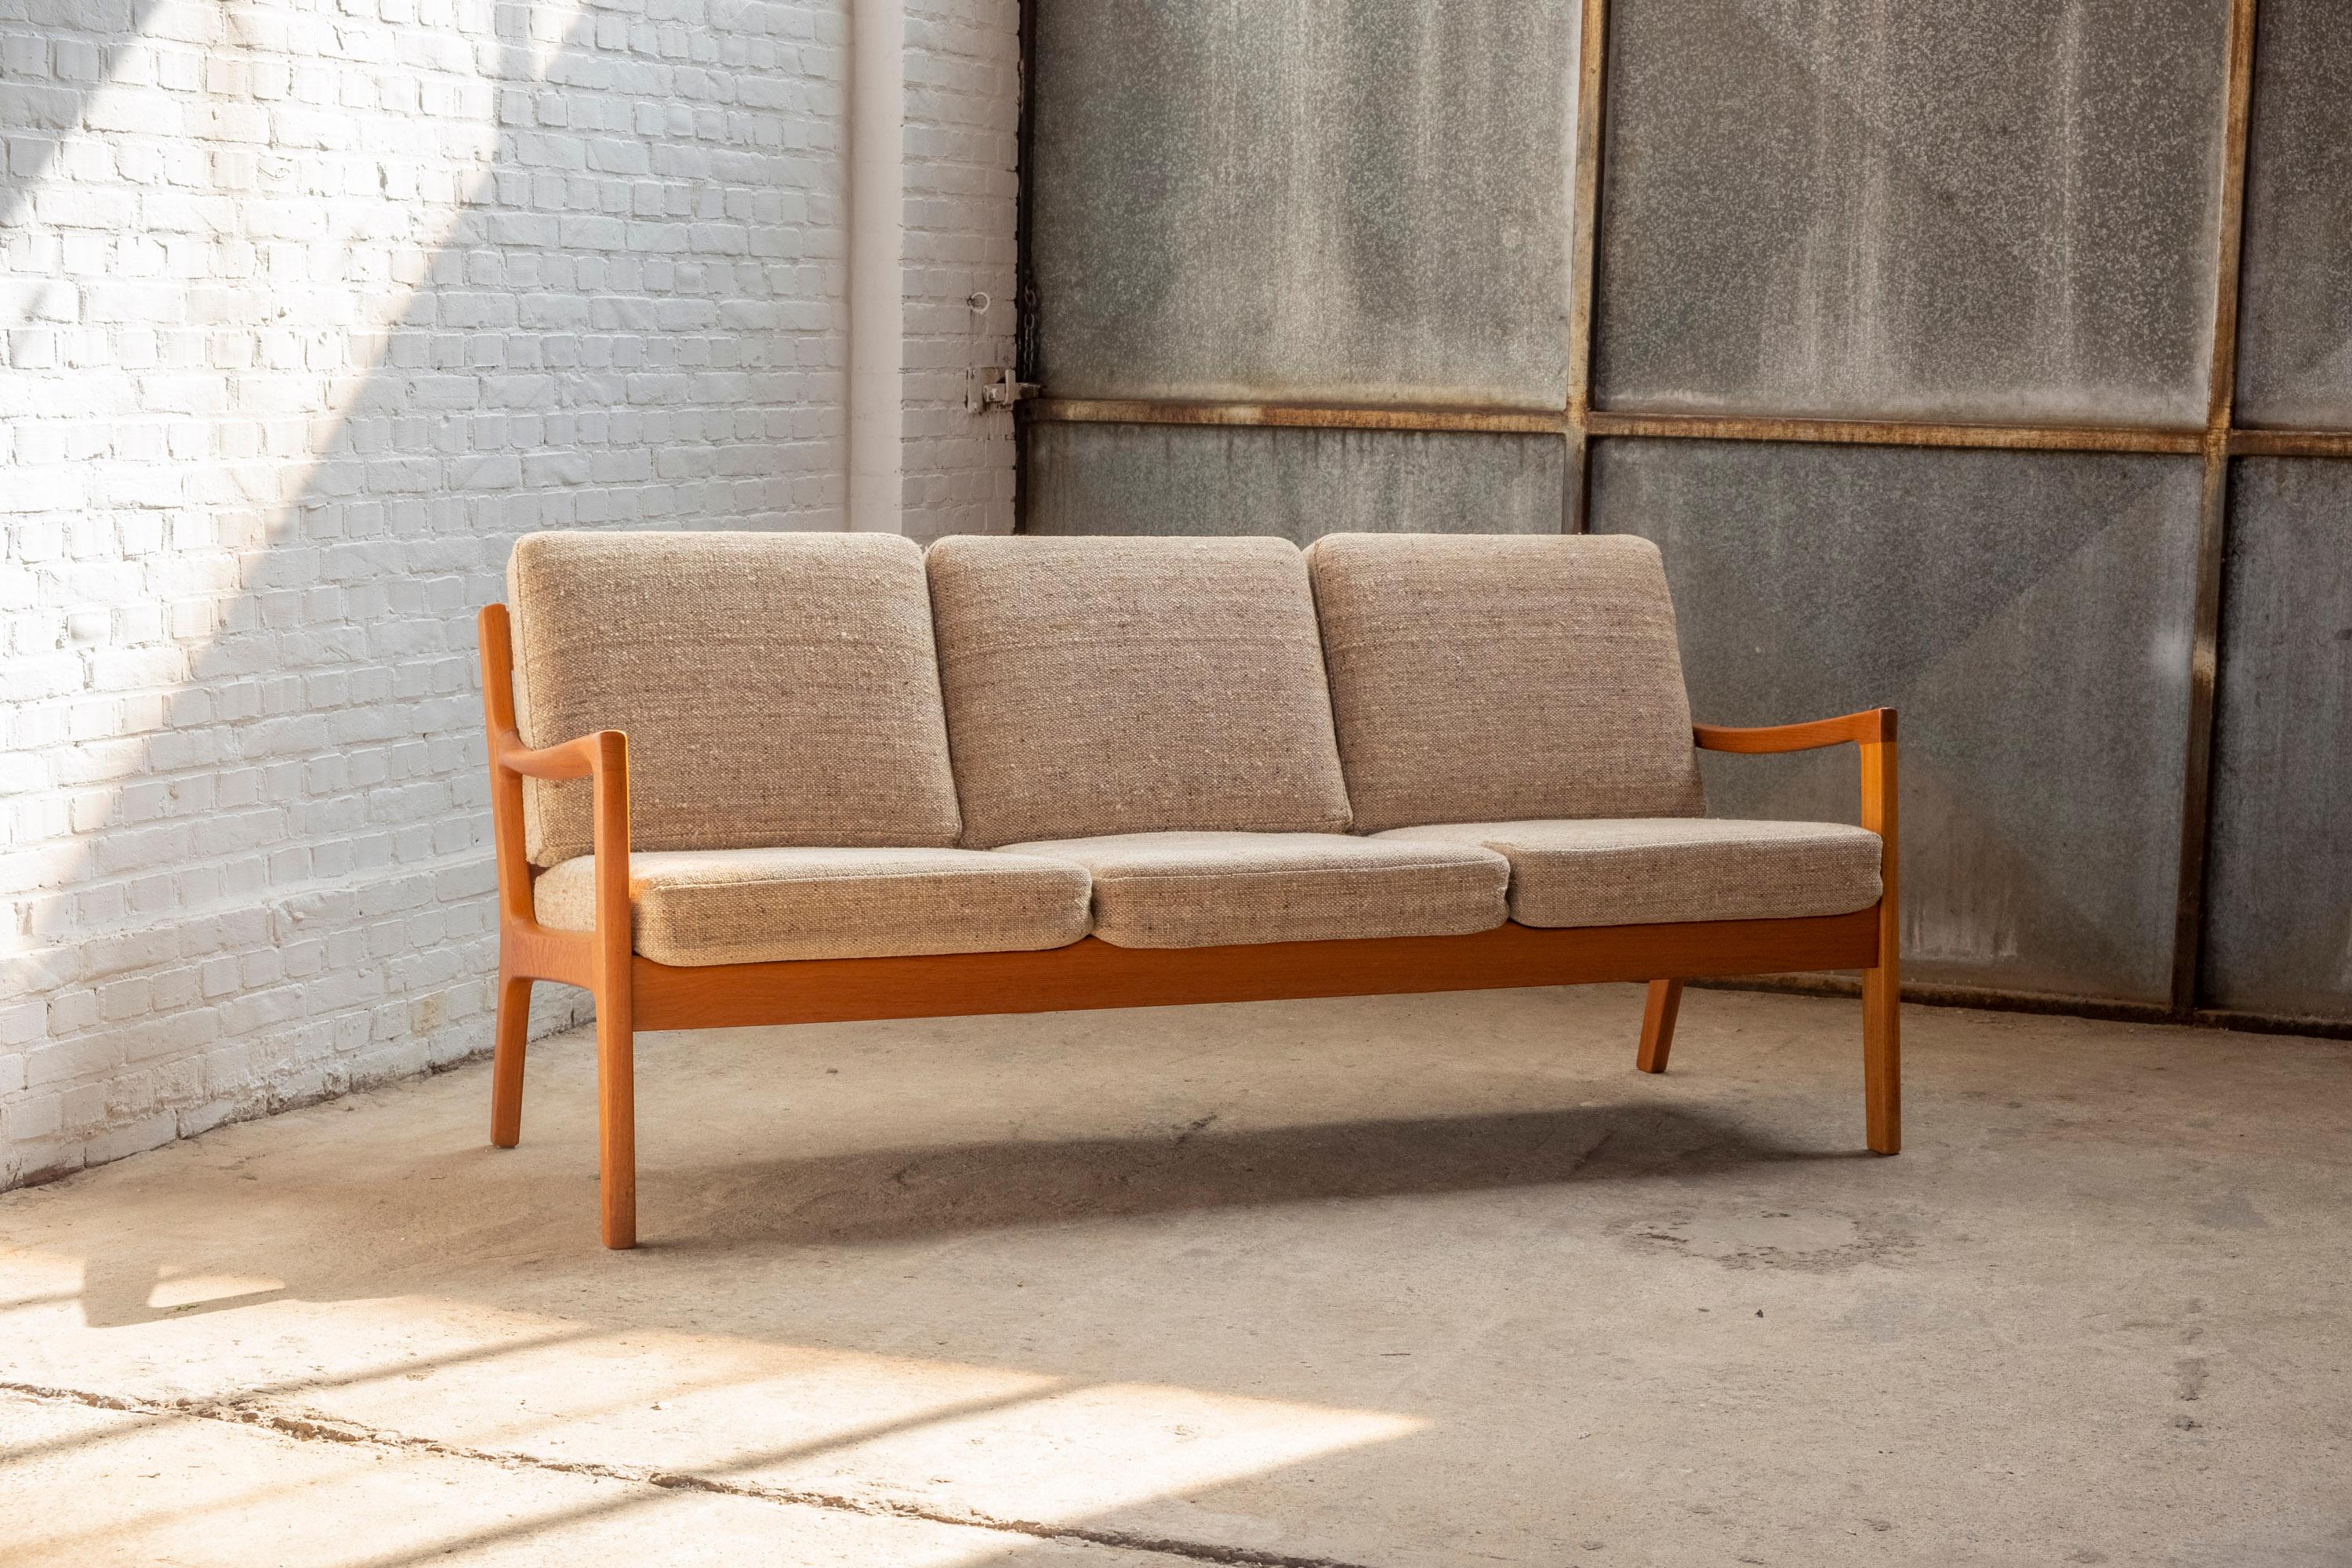 Beautiful 3-Seater sofa in teak, model Senator 166 designed by Ole Wanscher produced by P. Jeppesen Møbelfabrik in Denmark.
Original cushions and fabric.
The sofa and cushions are in good vintage condition and shows very few and light traces of use,